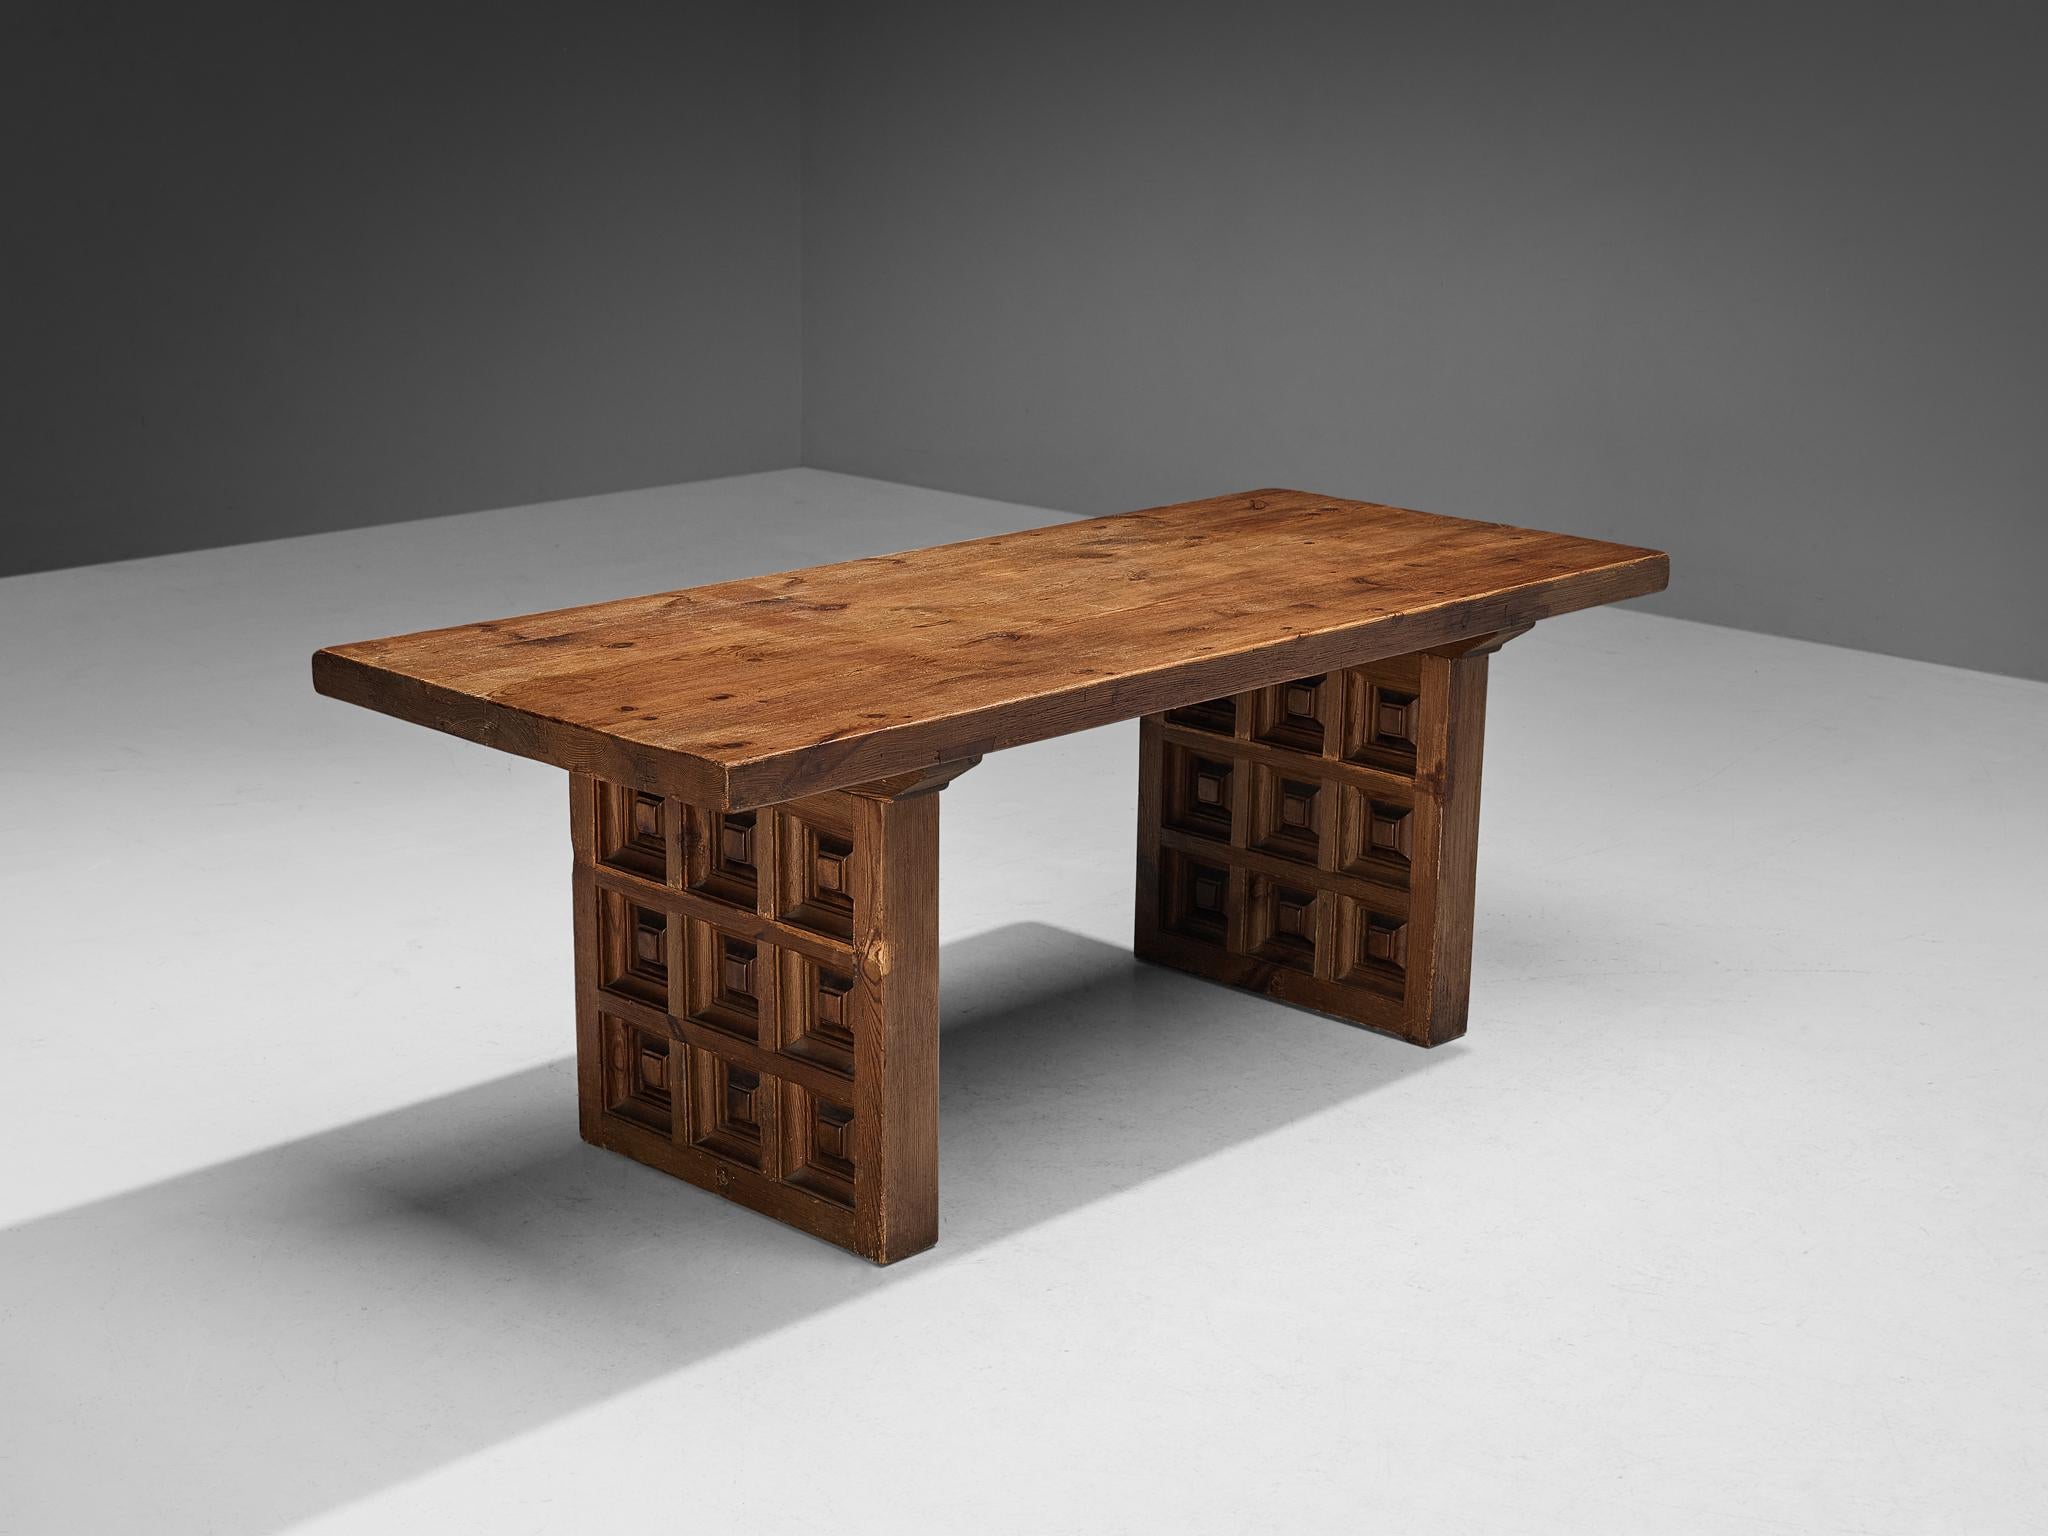 Biosca, dining table, stained pine, Spain, 1960s

Outstanding Spanish dining table that is executed by Biosca in an architectural way. The two bases feature a geometrical carved pattern, giving the table a graphic texture. This is very typical for